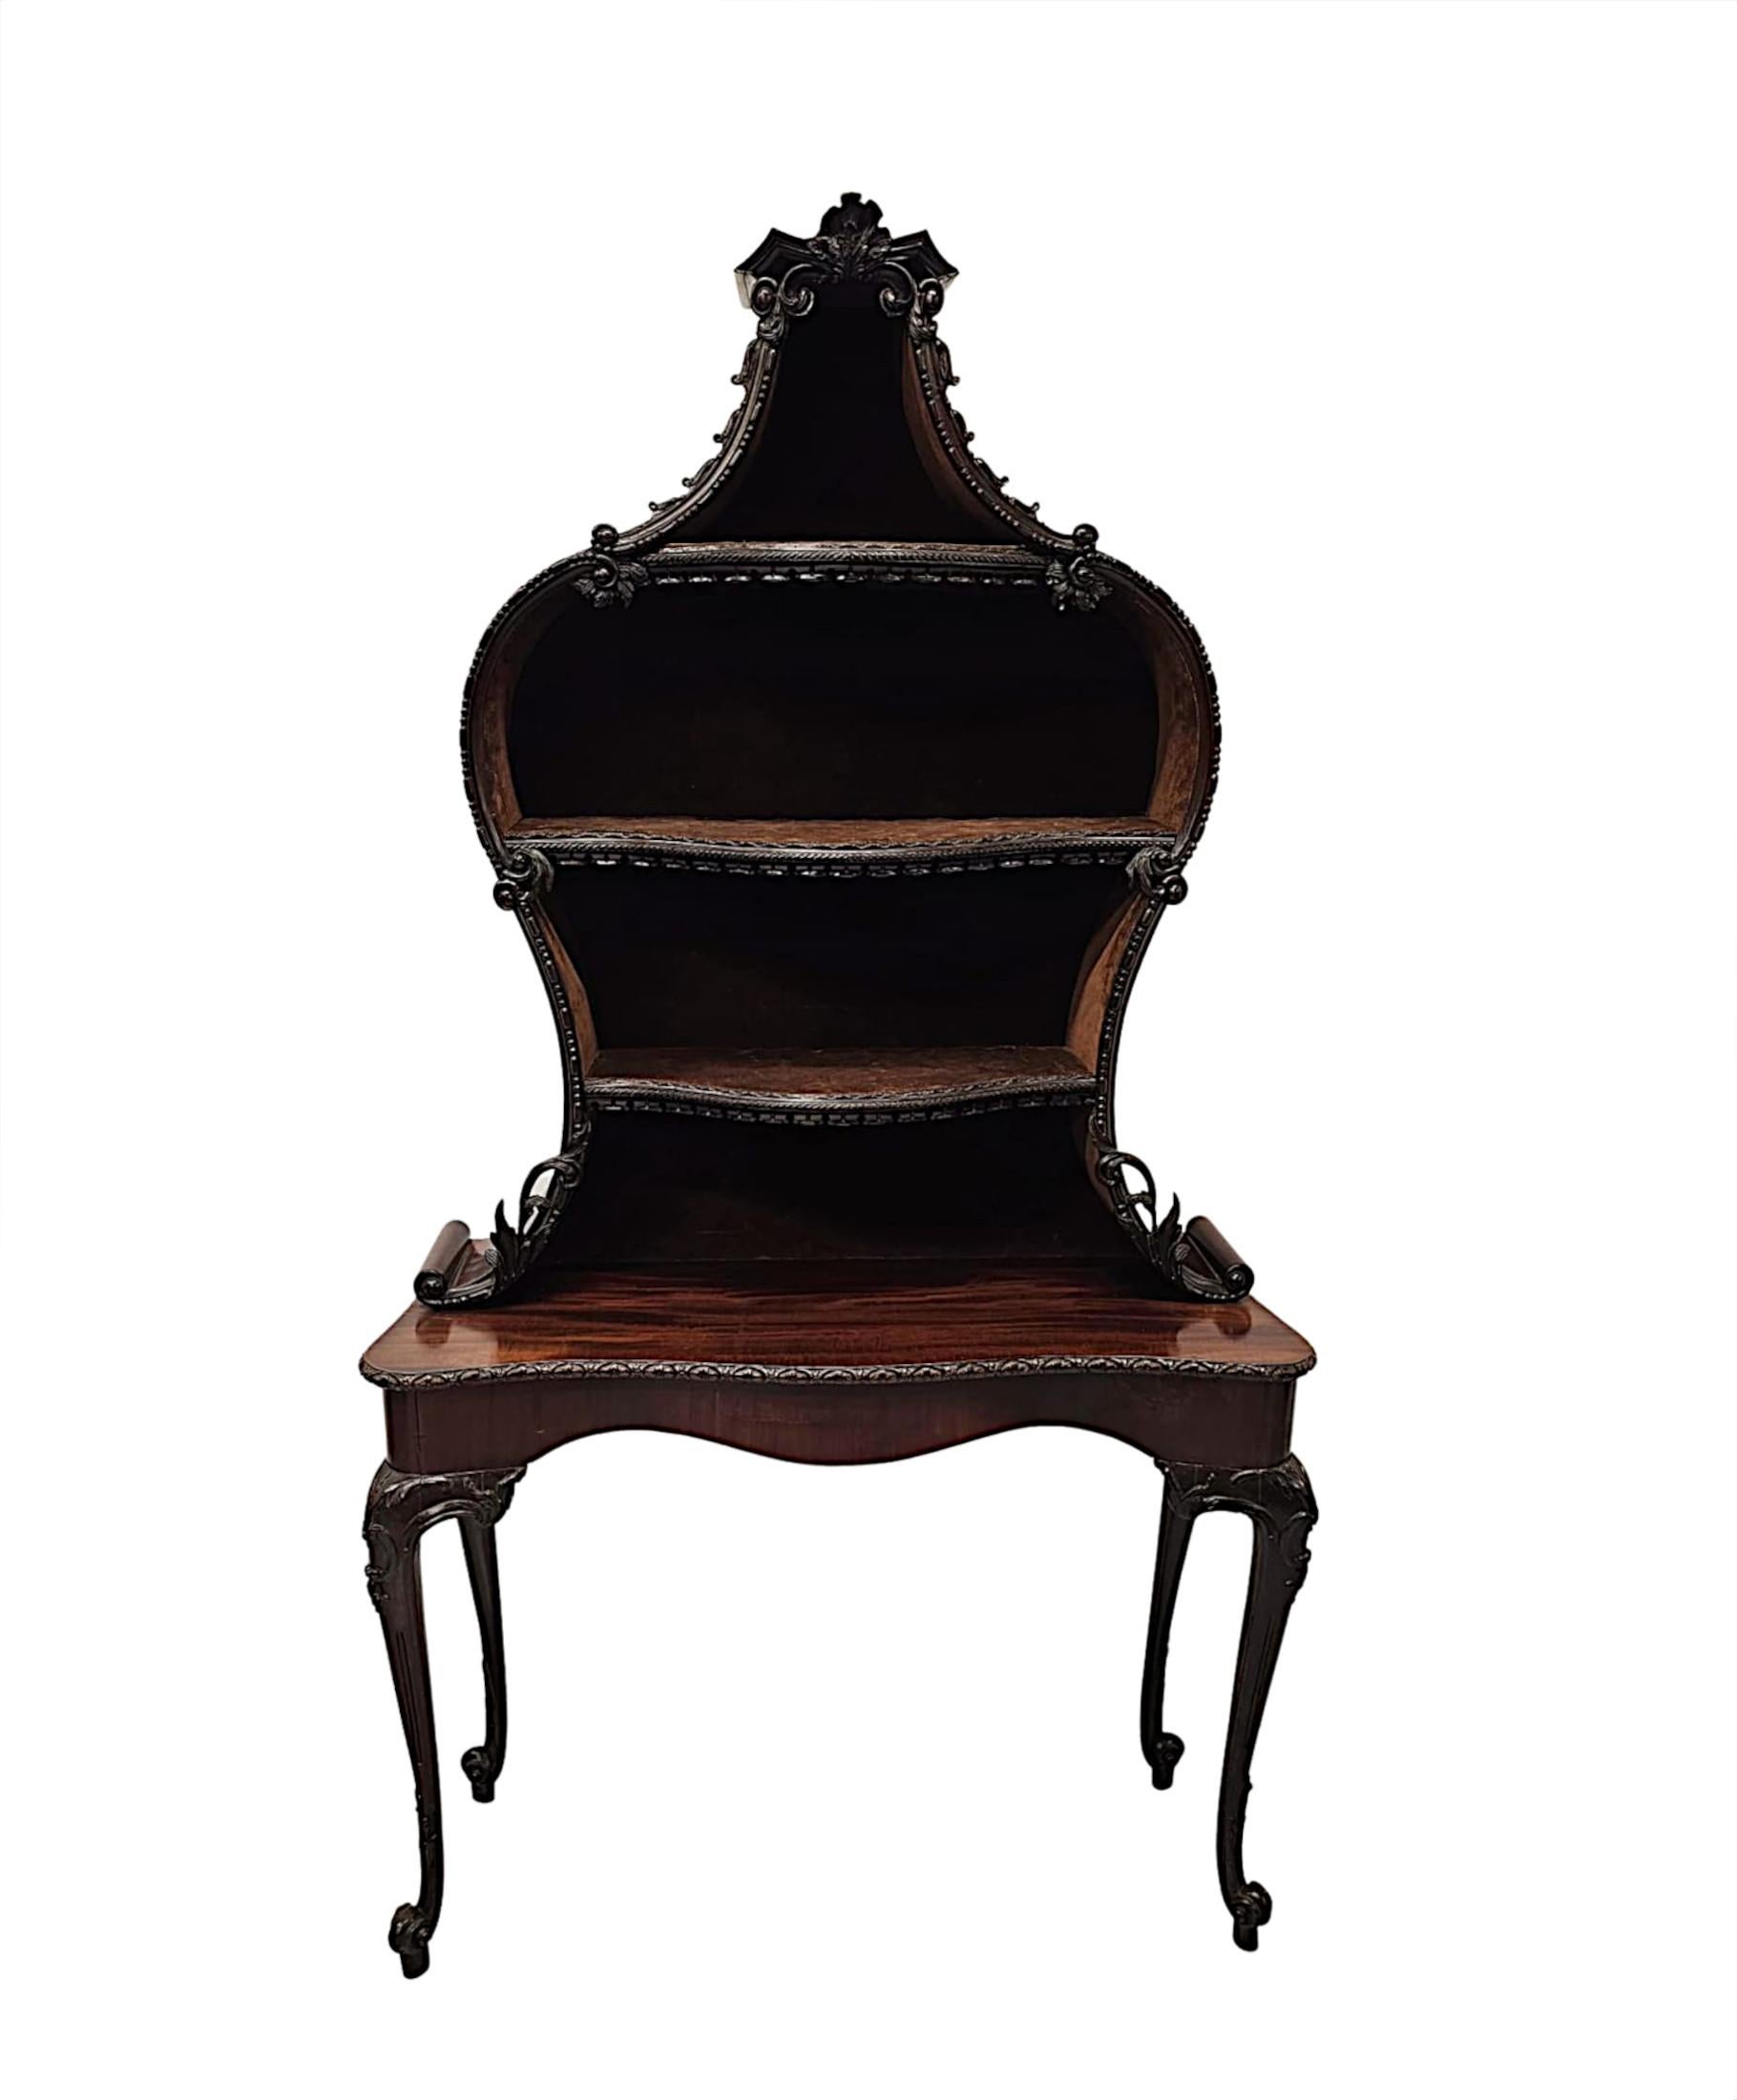 A very rare and fine unusual 19th Century pair of finely figured mahogany bookcases or display cases of exceptional quality, finely hand carved with gorgeously rich patination, grain and with intricately carved scrolls, trailing foliate,